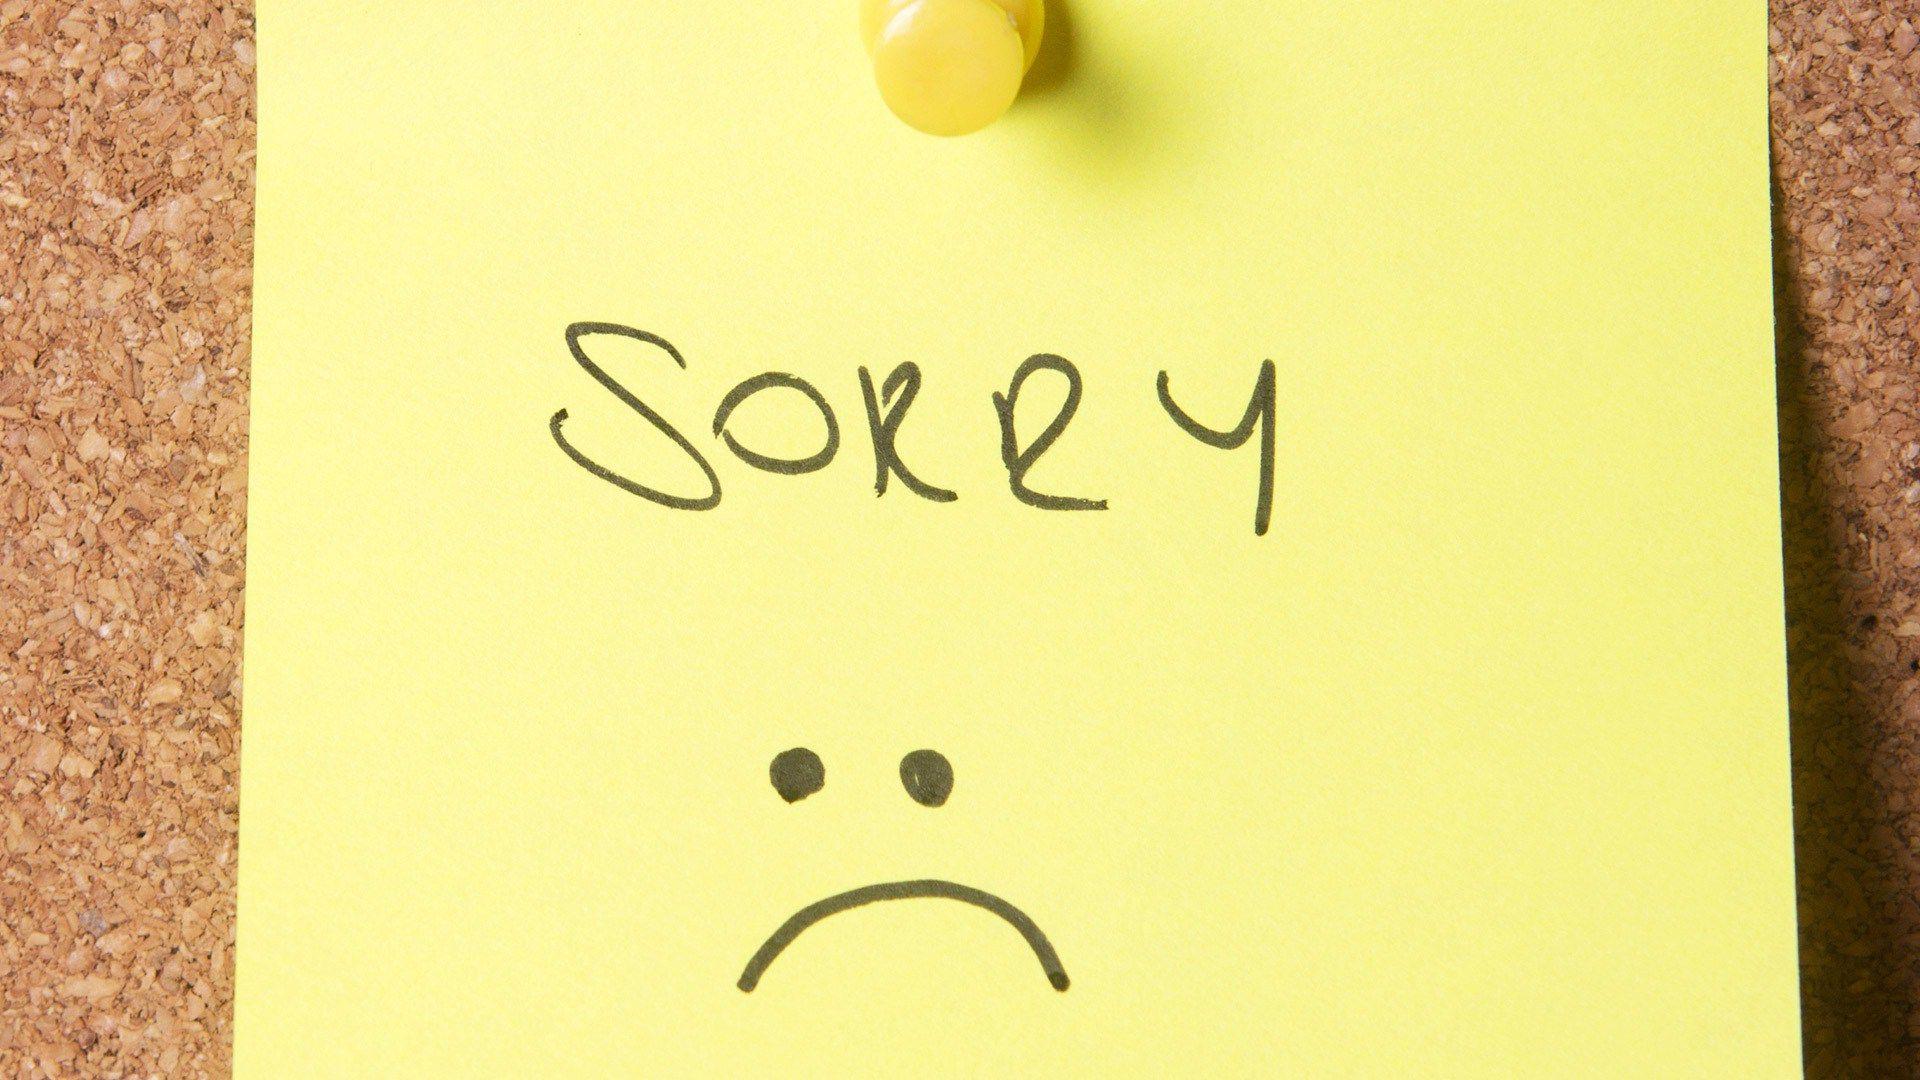 Cute Apology Messages to a Lover with Sorry Image